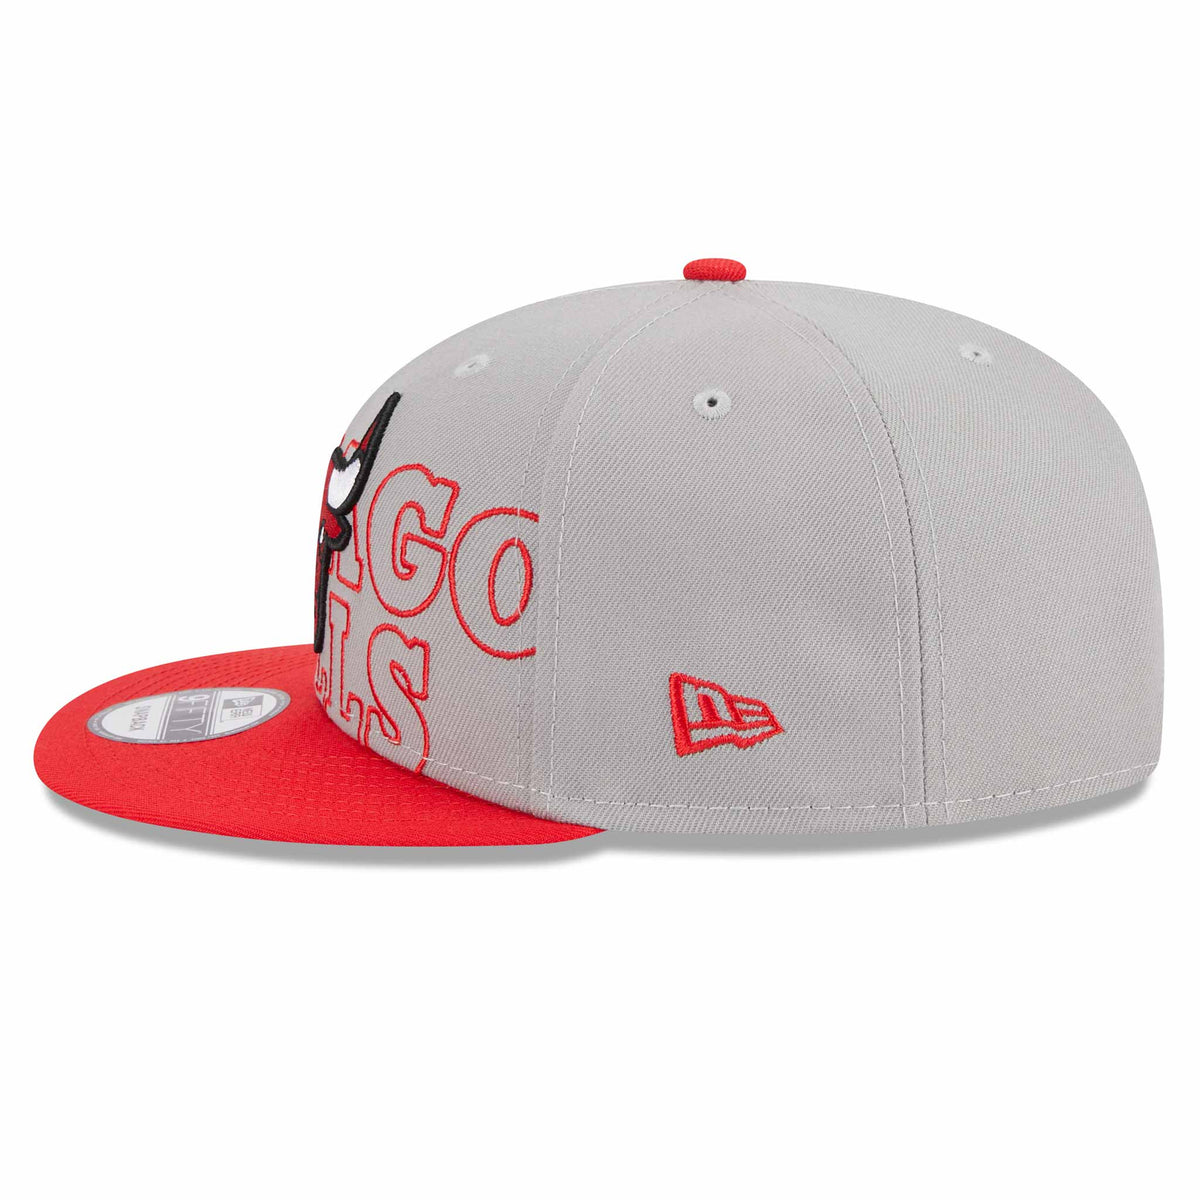 Chicago Bulls Youth Two Tone 9FIFTY Snapback Cap – Wrigleyville Sports